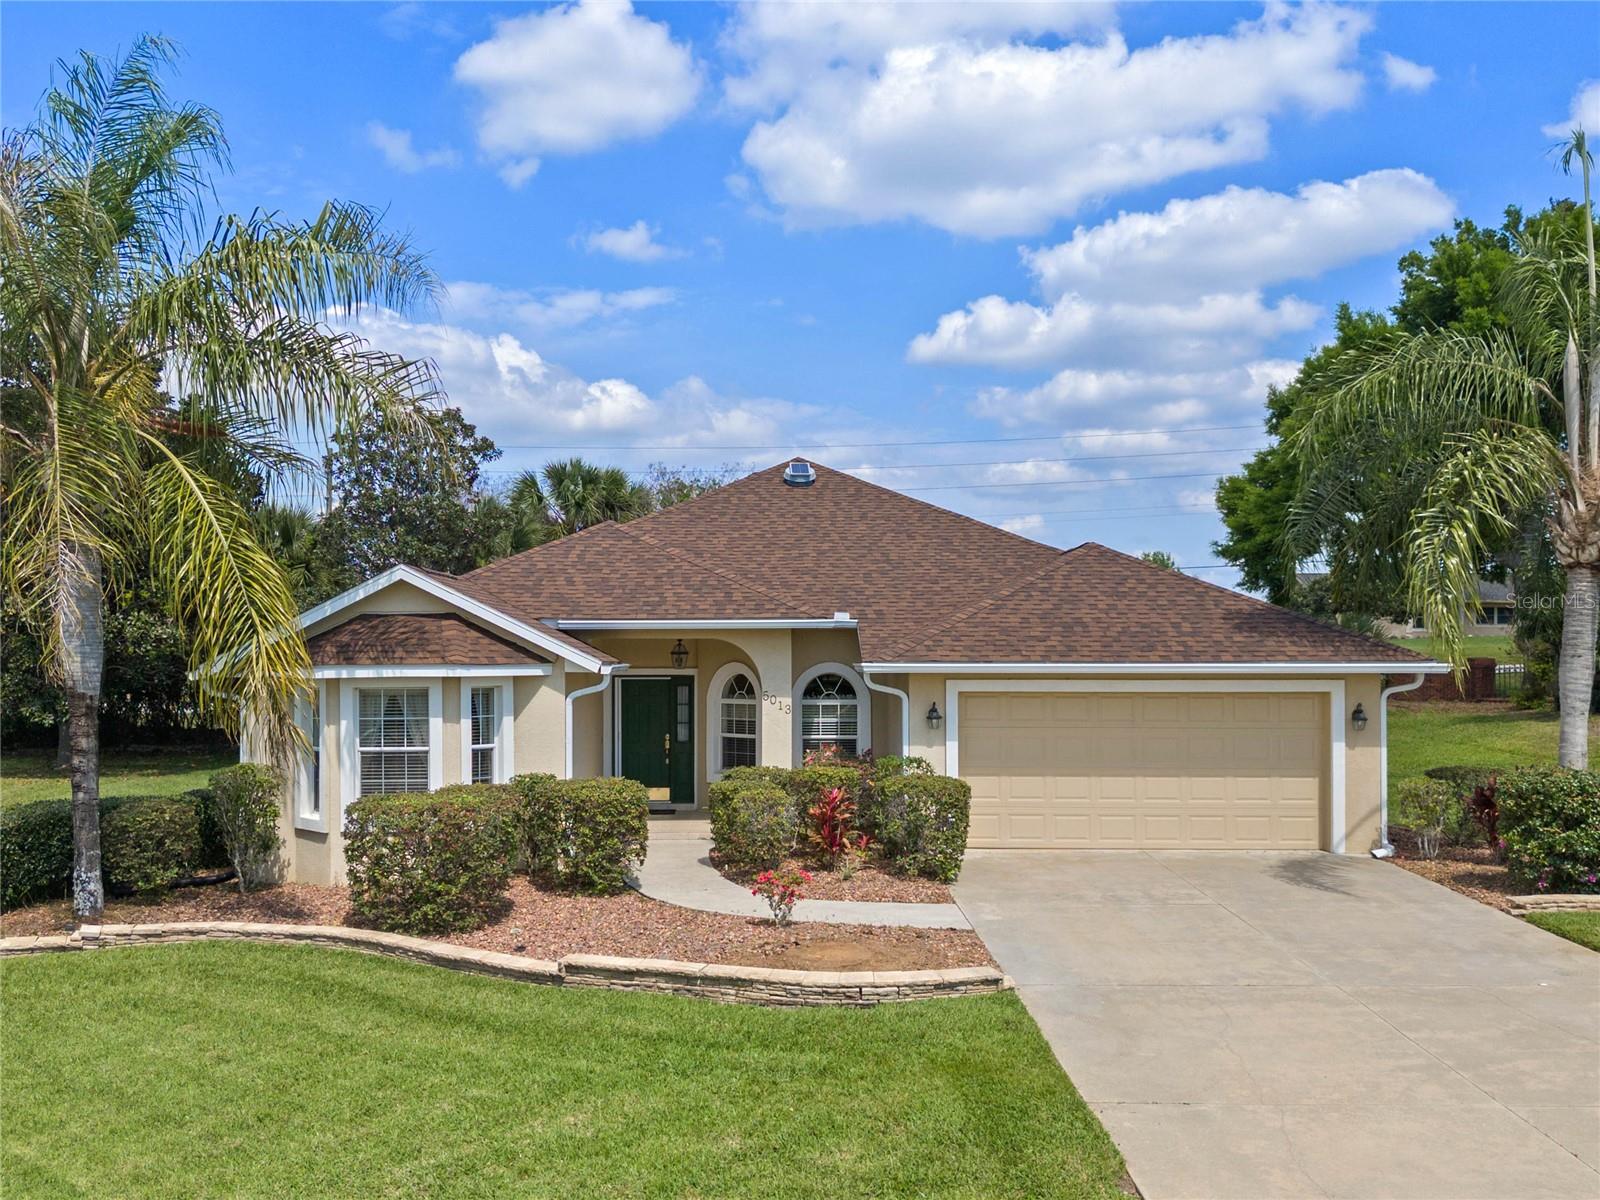 Details for 5013 Harbor Heights, LADY LAKE, FL 32159